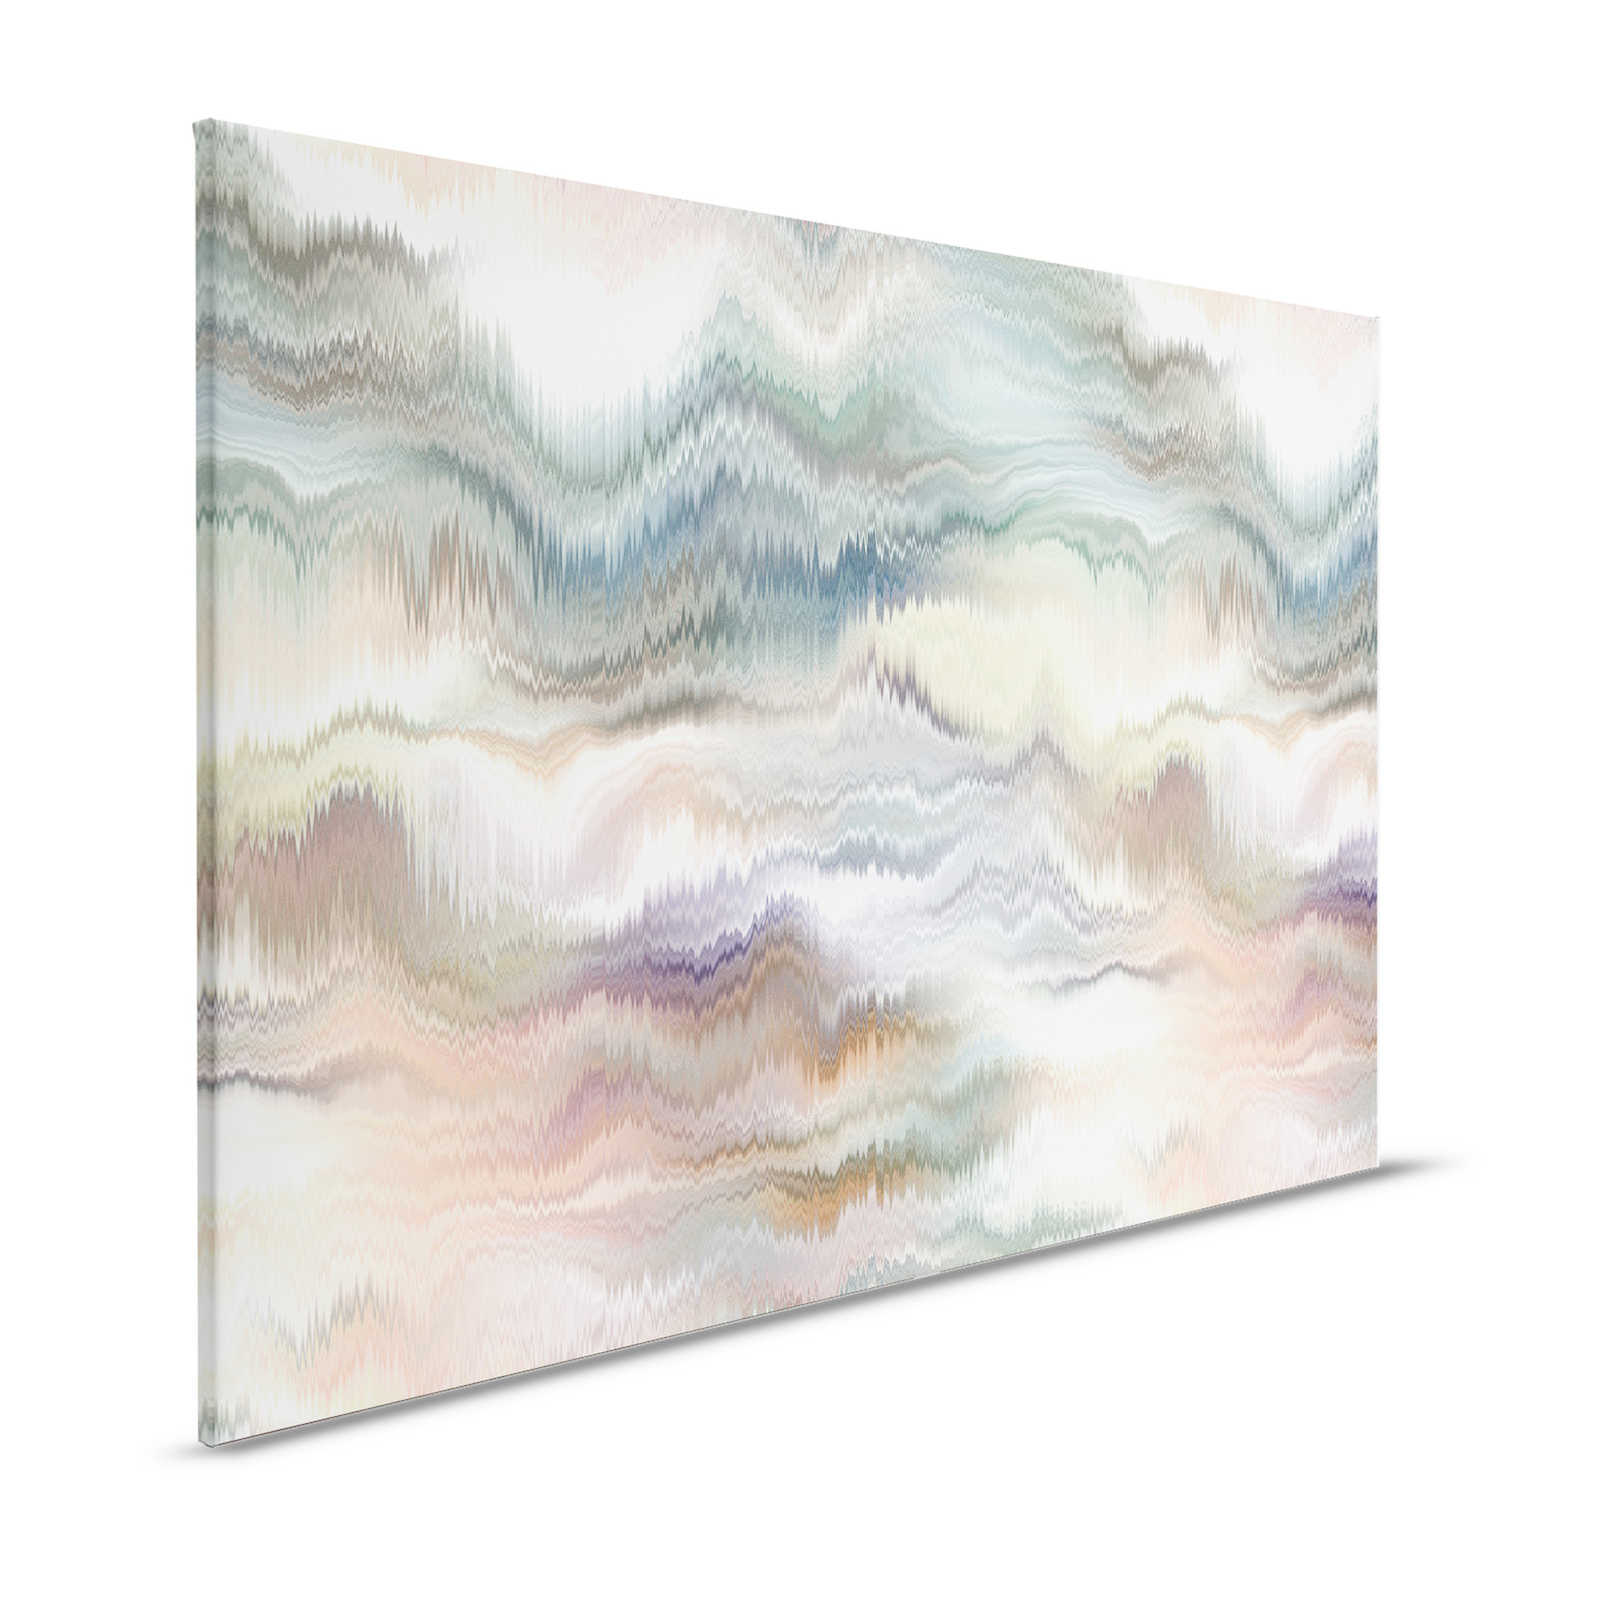 Pastel Palace 2 - Colourful Canvas Painting Pastel Colours & Abstract Pattern - 1.20 m x 0.80 m
